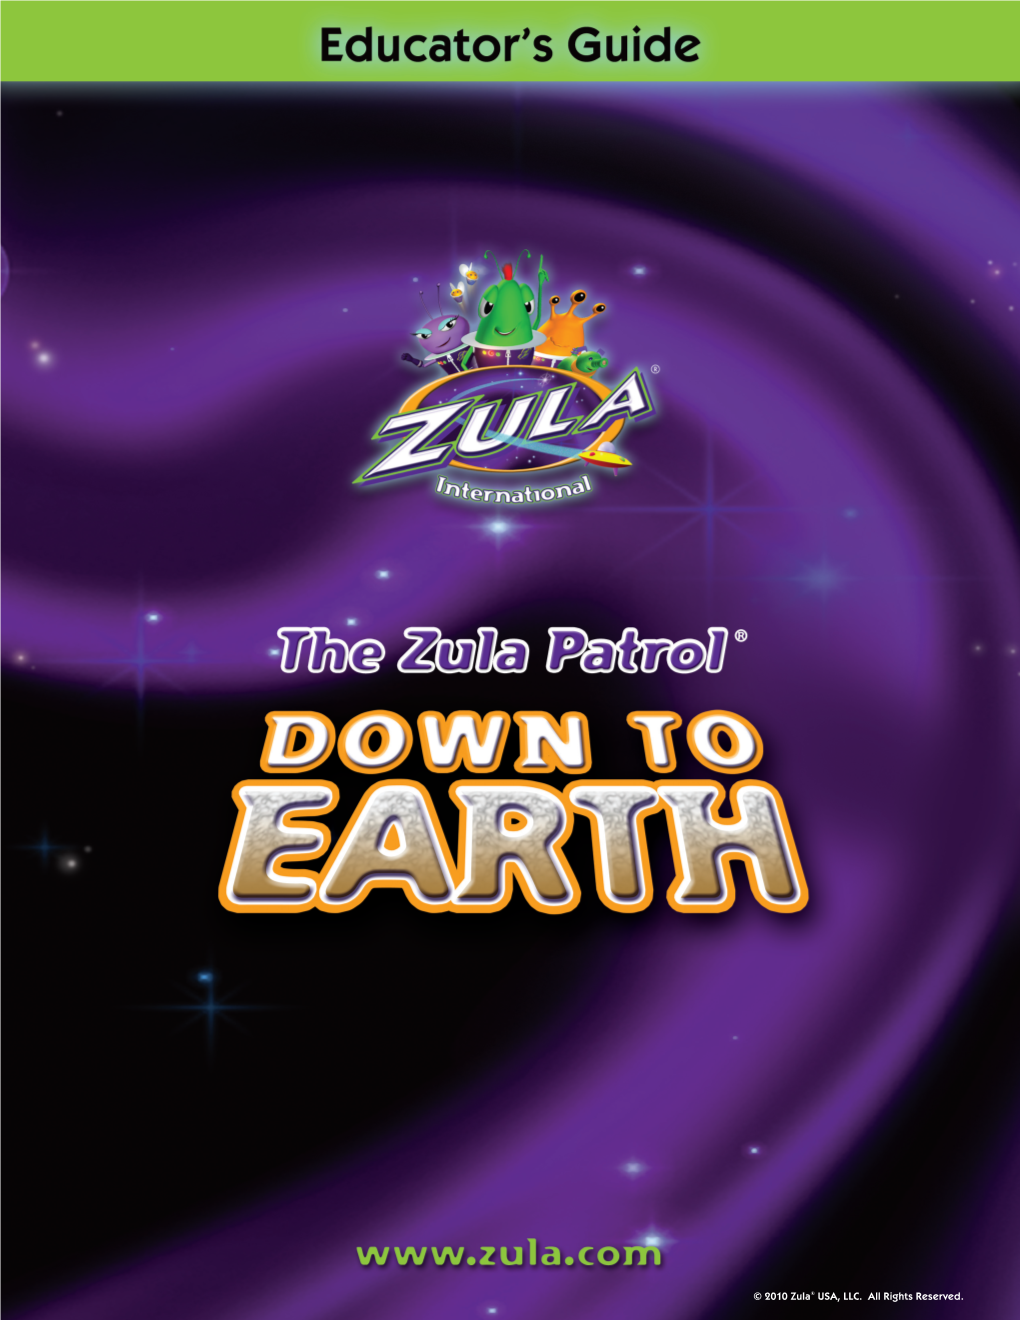 The Zula Patrol Down to Earth Educator's Guide